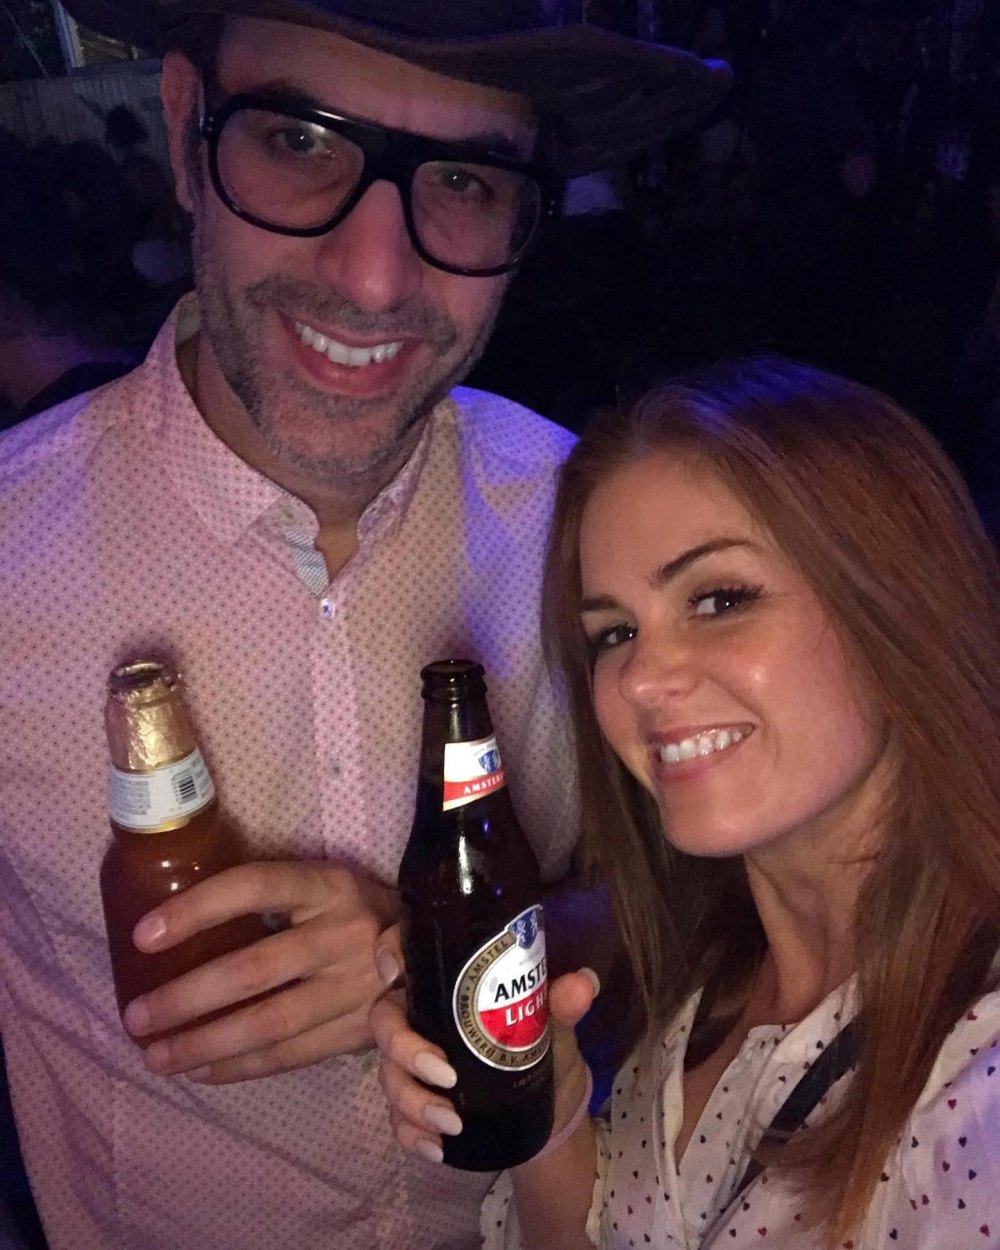 All the Signs Isla Fisher and Sacha Baron Cohen Were Headed for Divorce